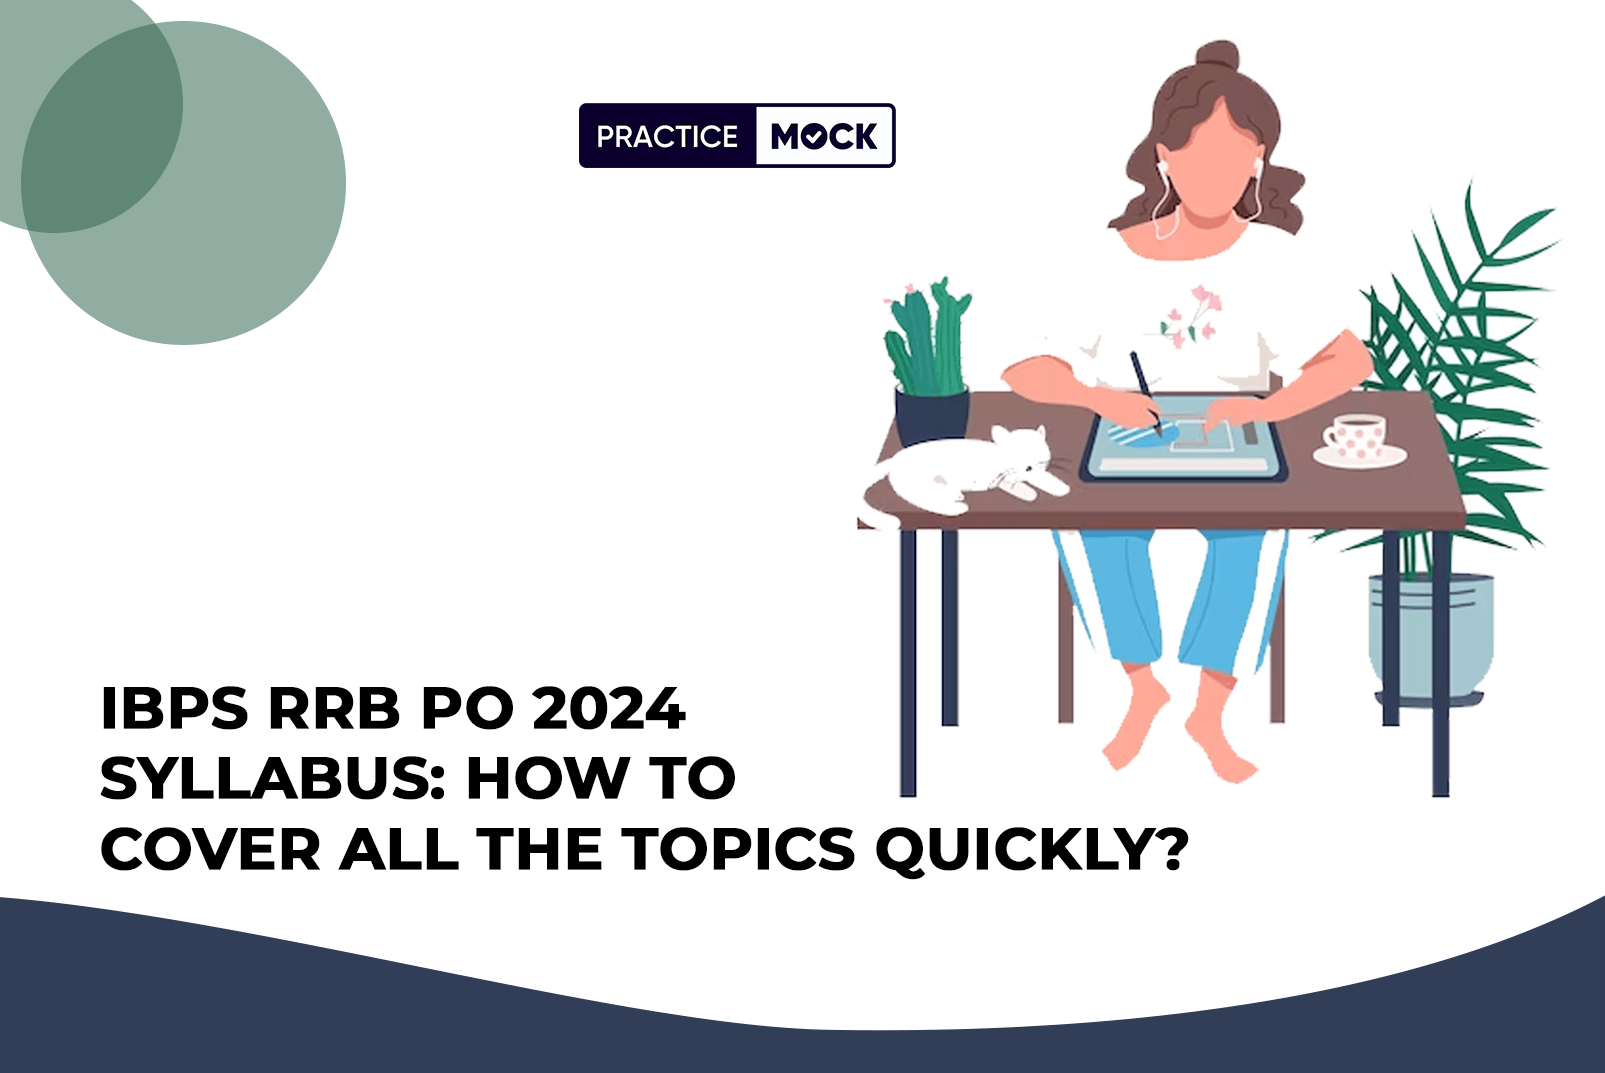 IBPS RRB PO 2024 Syllabus How to Cover All the Topics Quickly